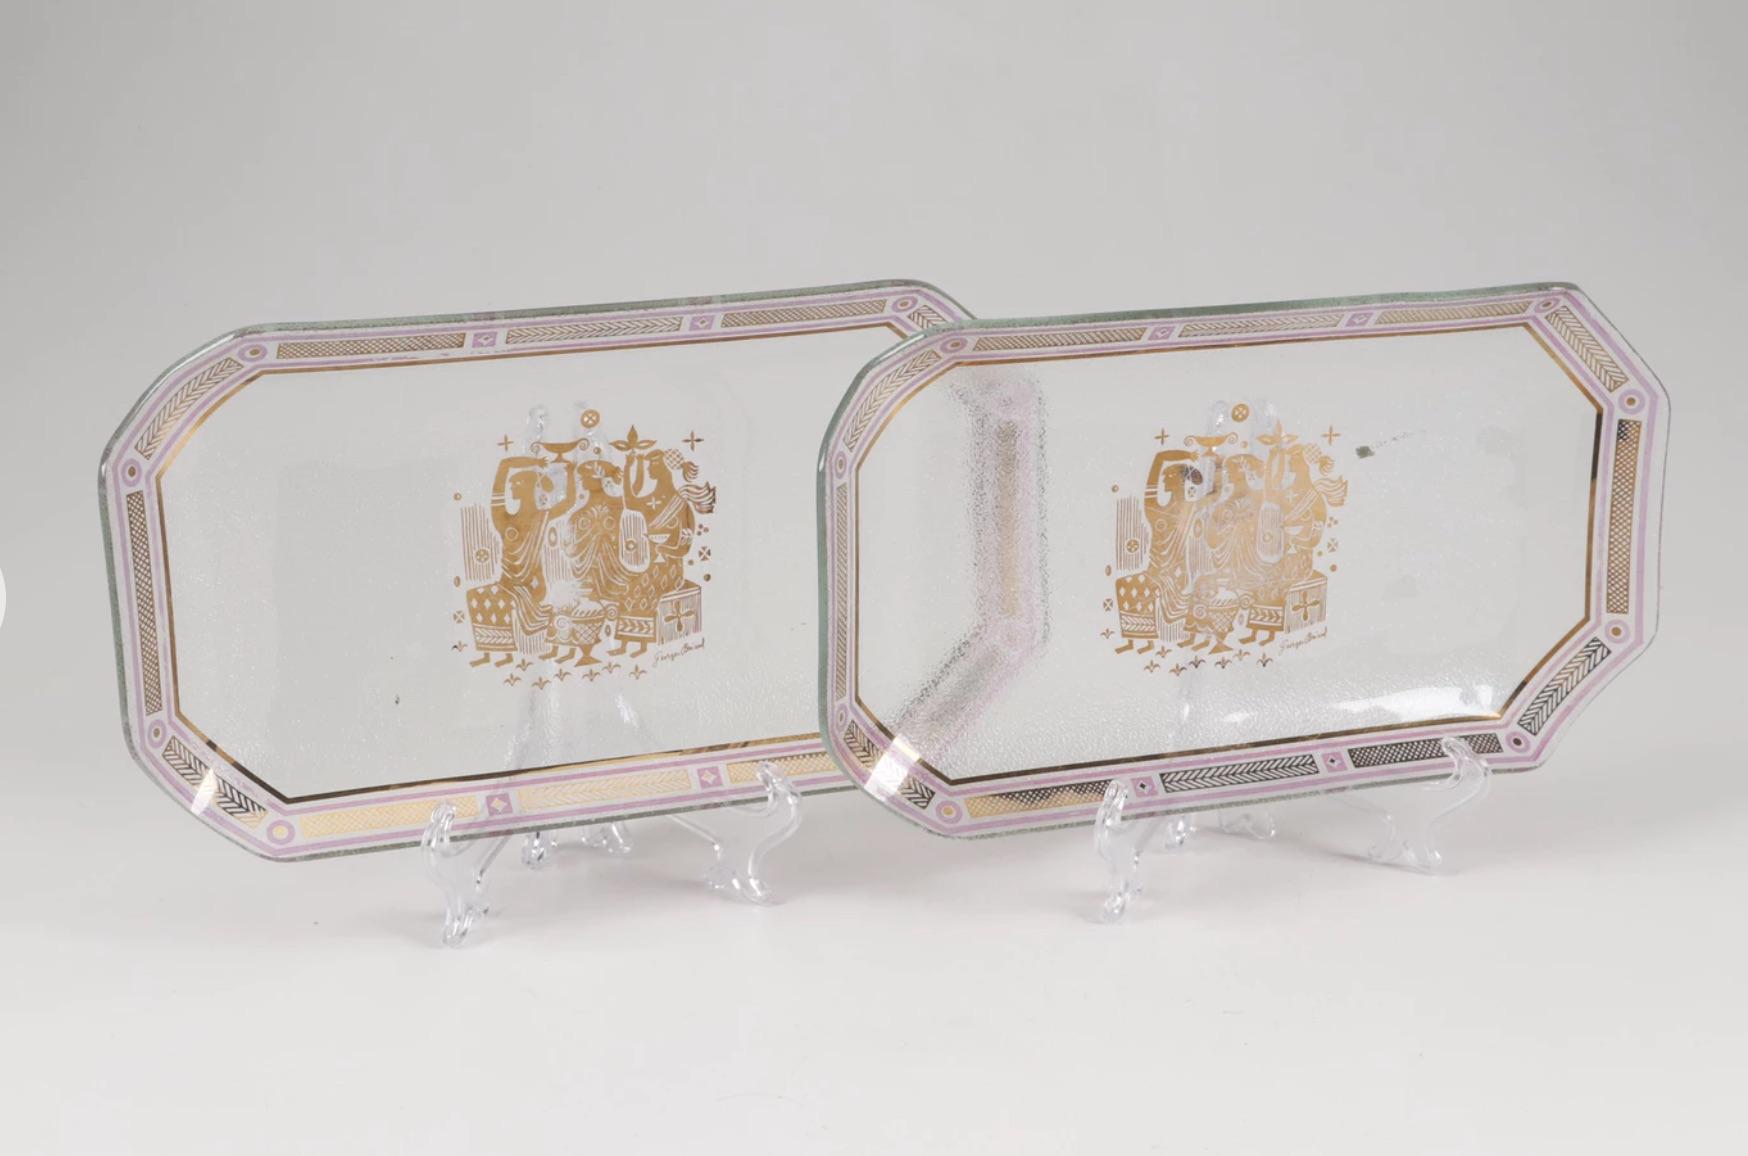 Set of 3 1950s Mid-Century Modern unique designer glass serving trays by Georges Briard,
clear glass with decorated Briard's gold neoclassic maidens designs and classic geometric gold and black decorative trim around the edges.
Signed- Georges